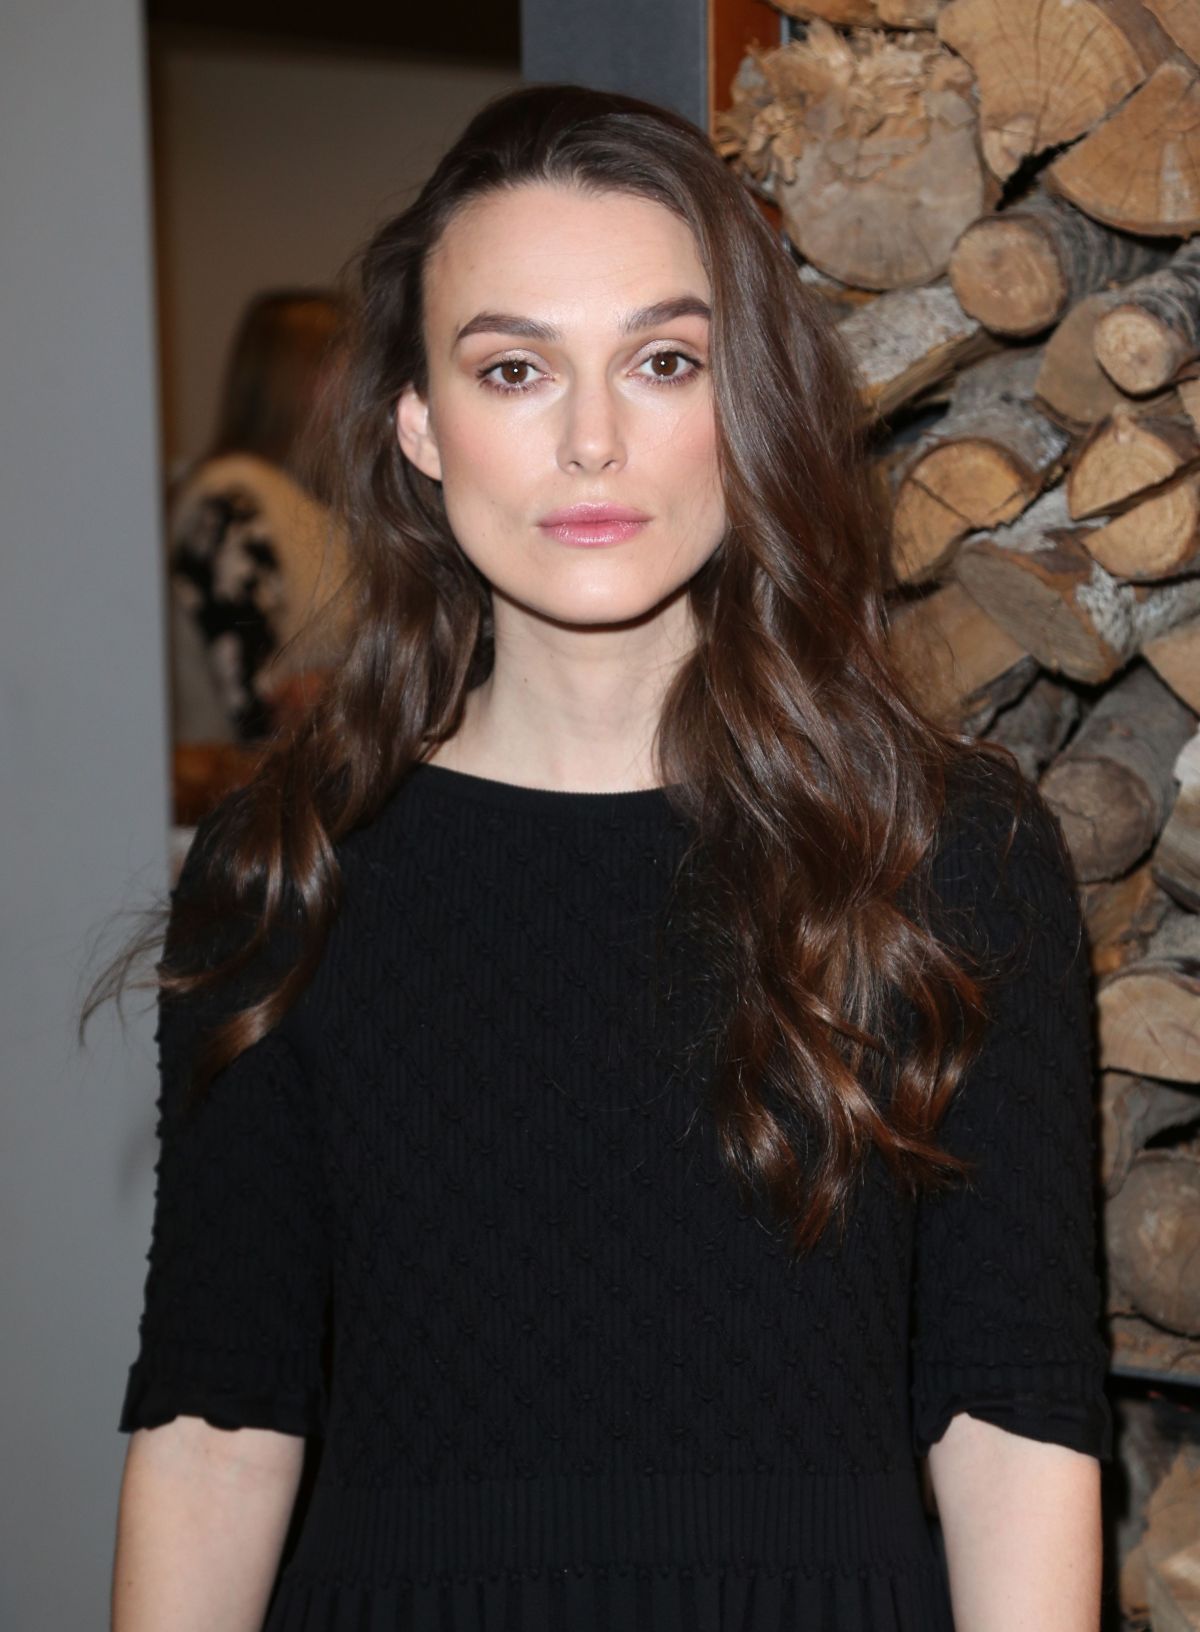 Keira Knightley Keira Knightley Actress Profile And New Photos Images